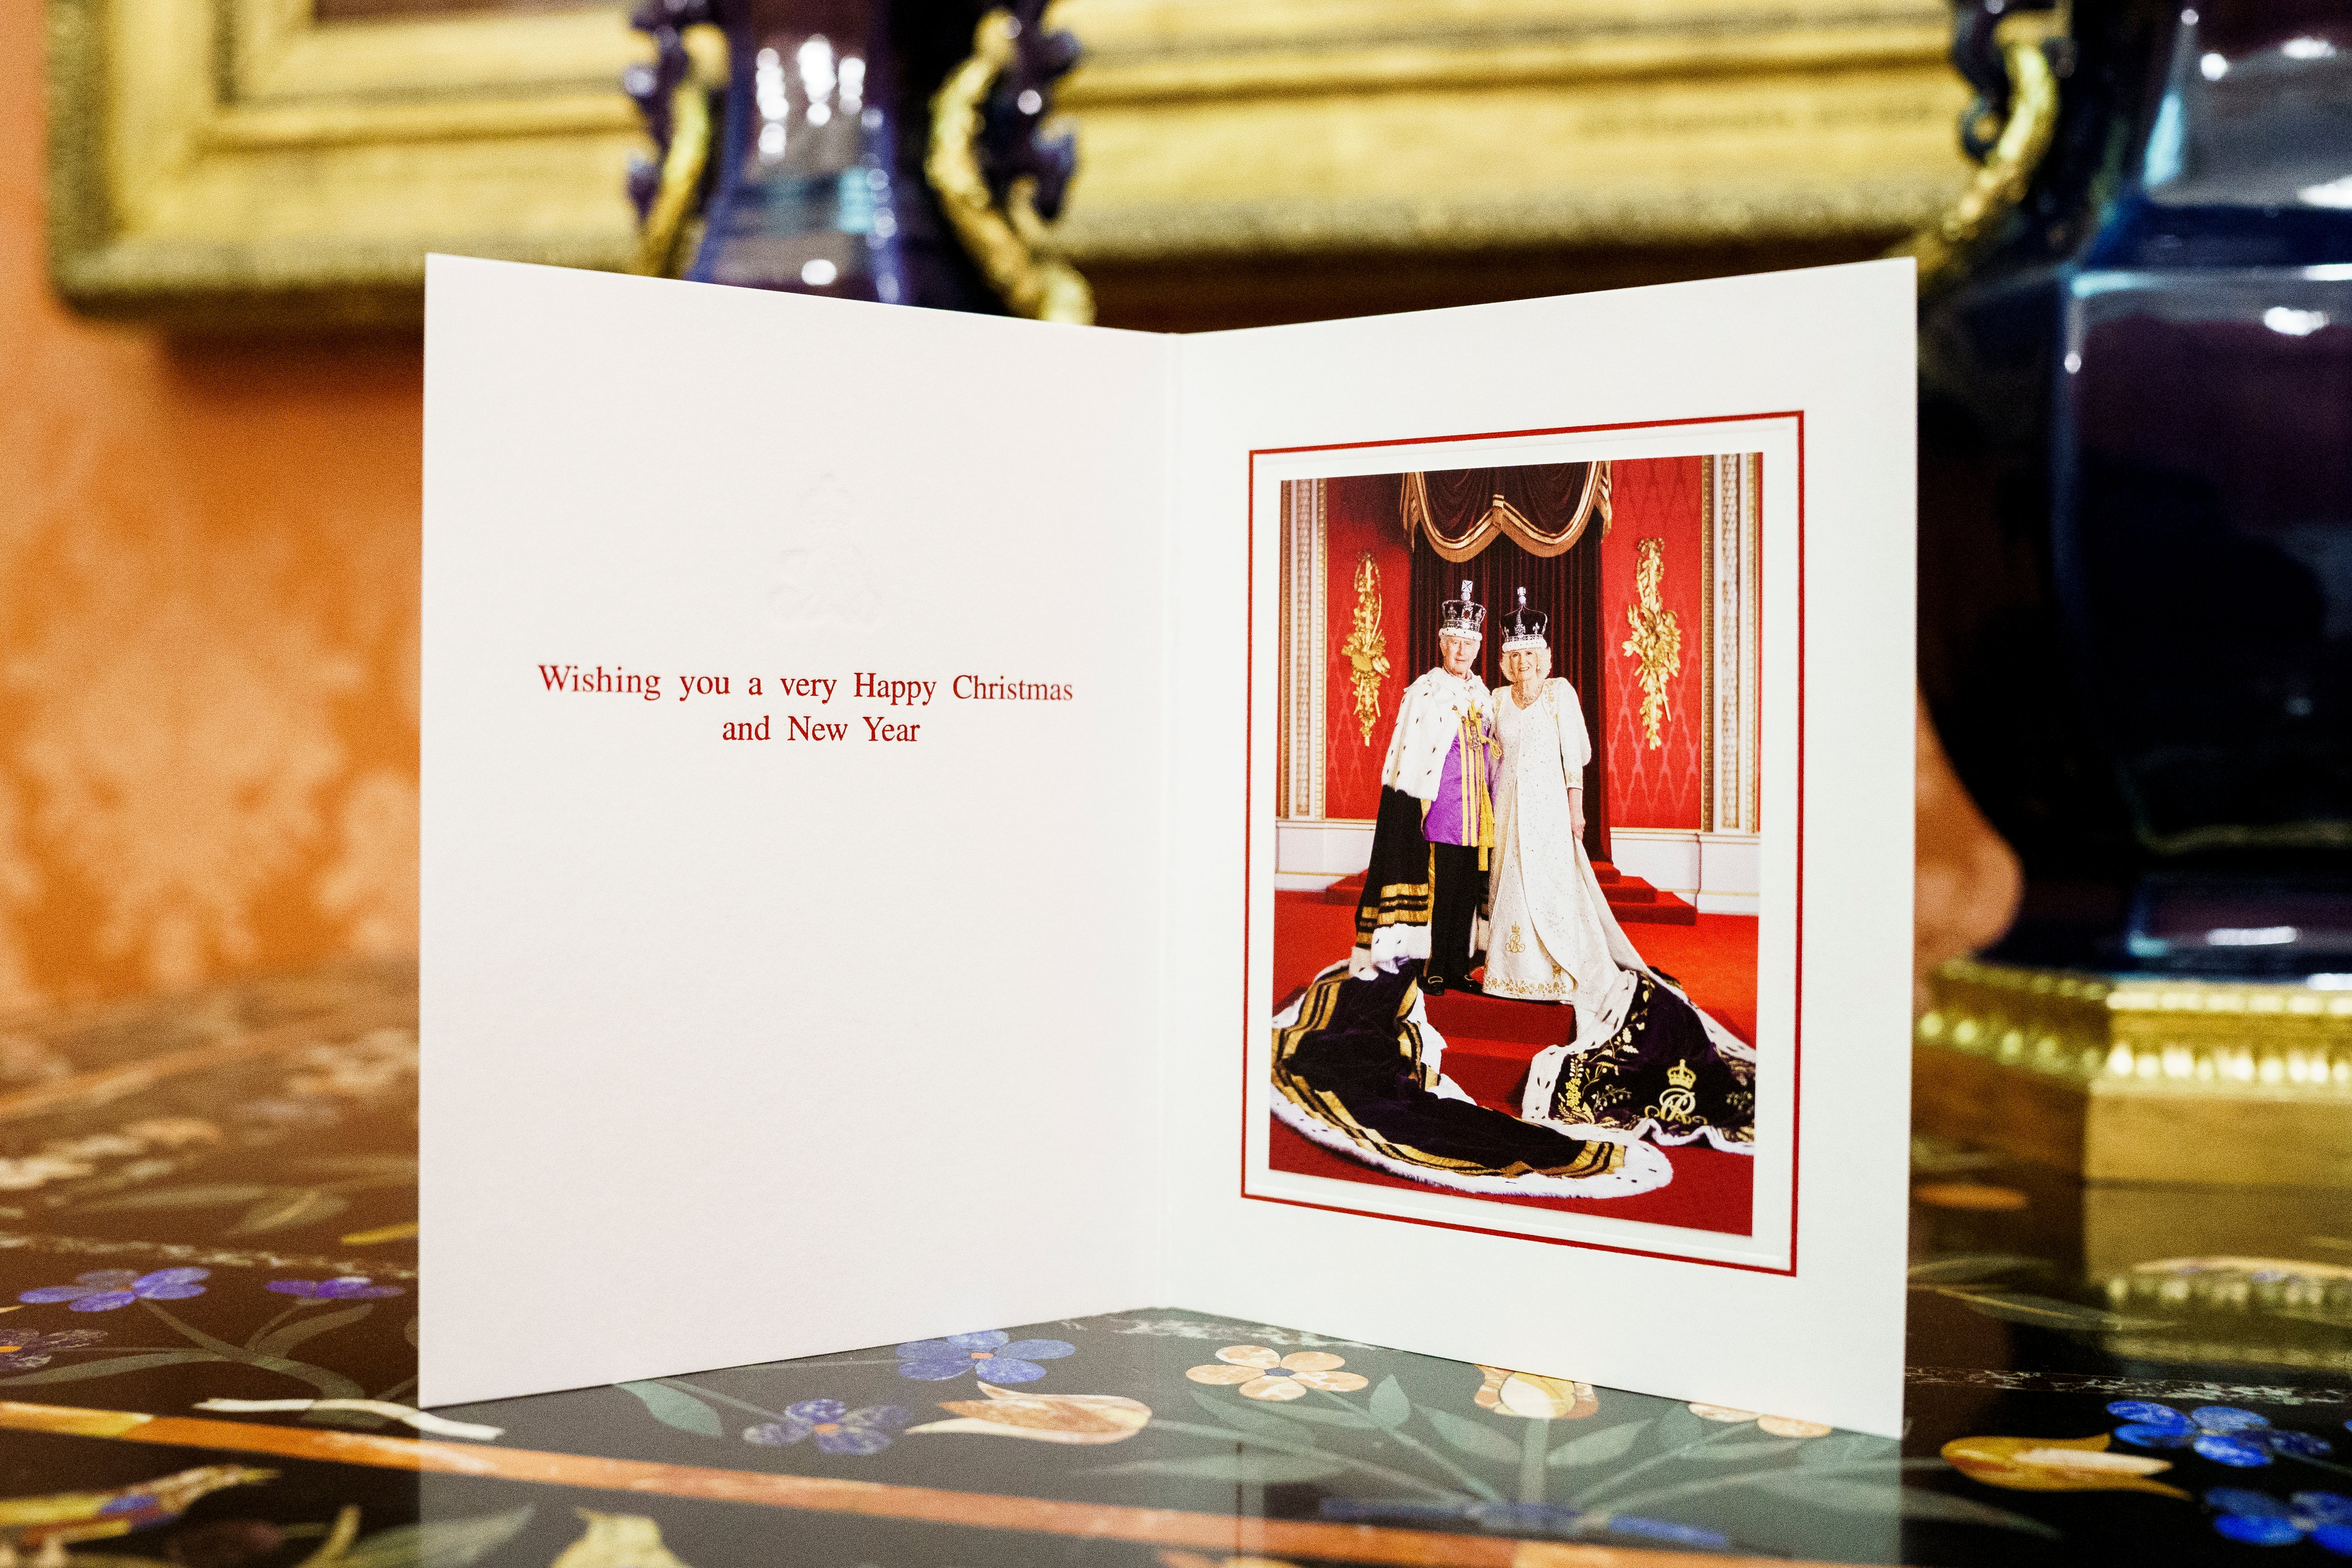 King Charles III and Queen Camilla’s 2023 Christmas card